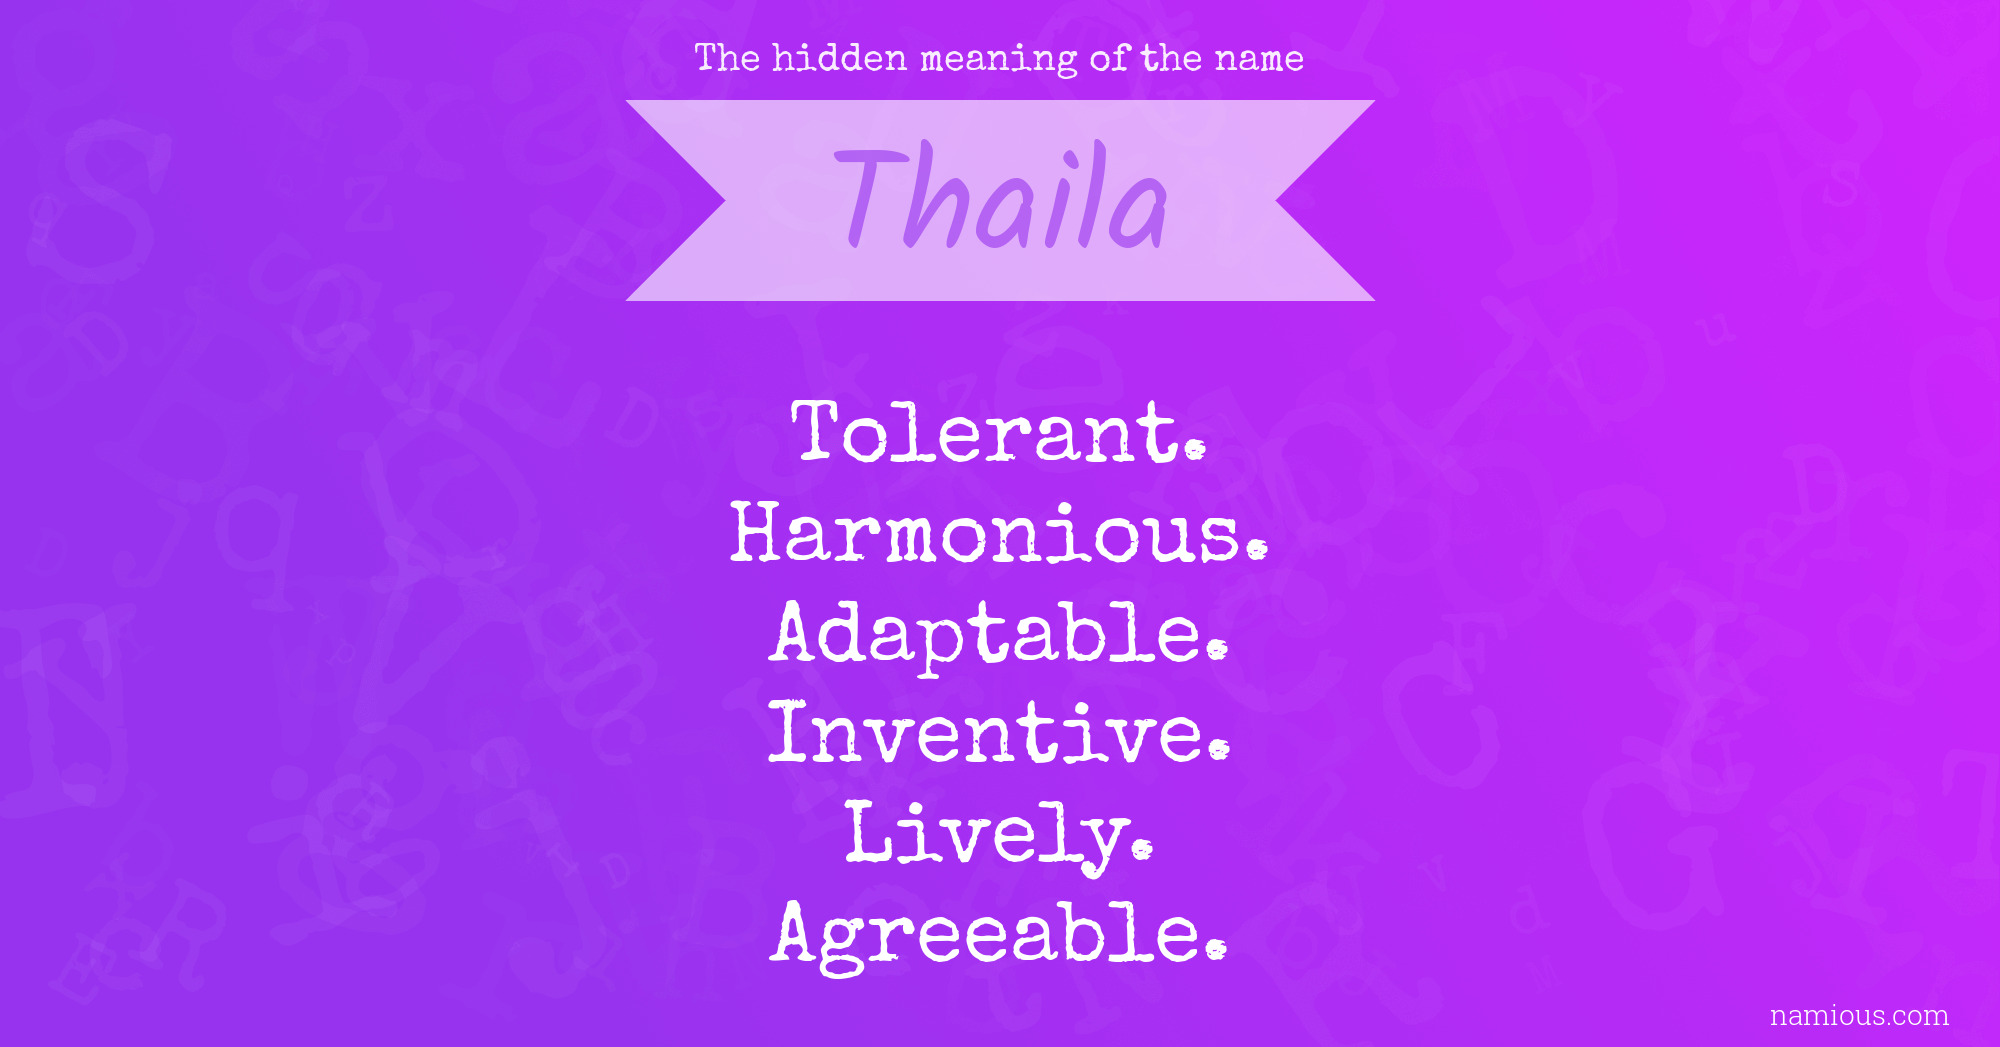 The hidden meaning of the name Thaila